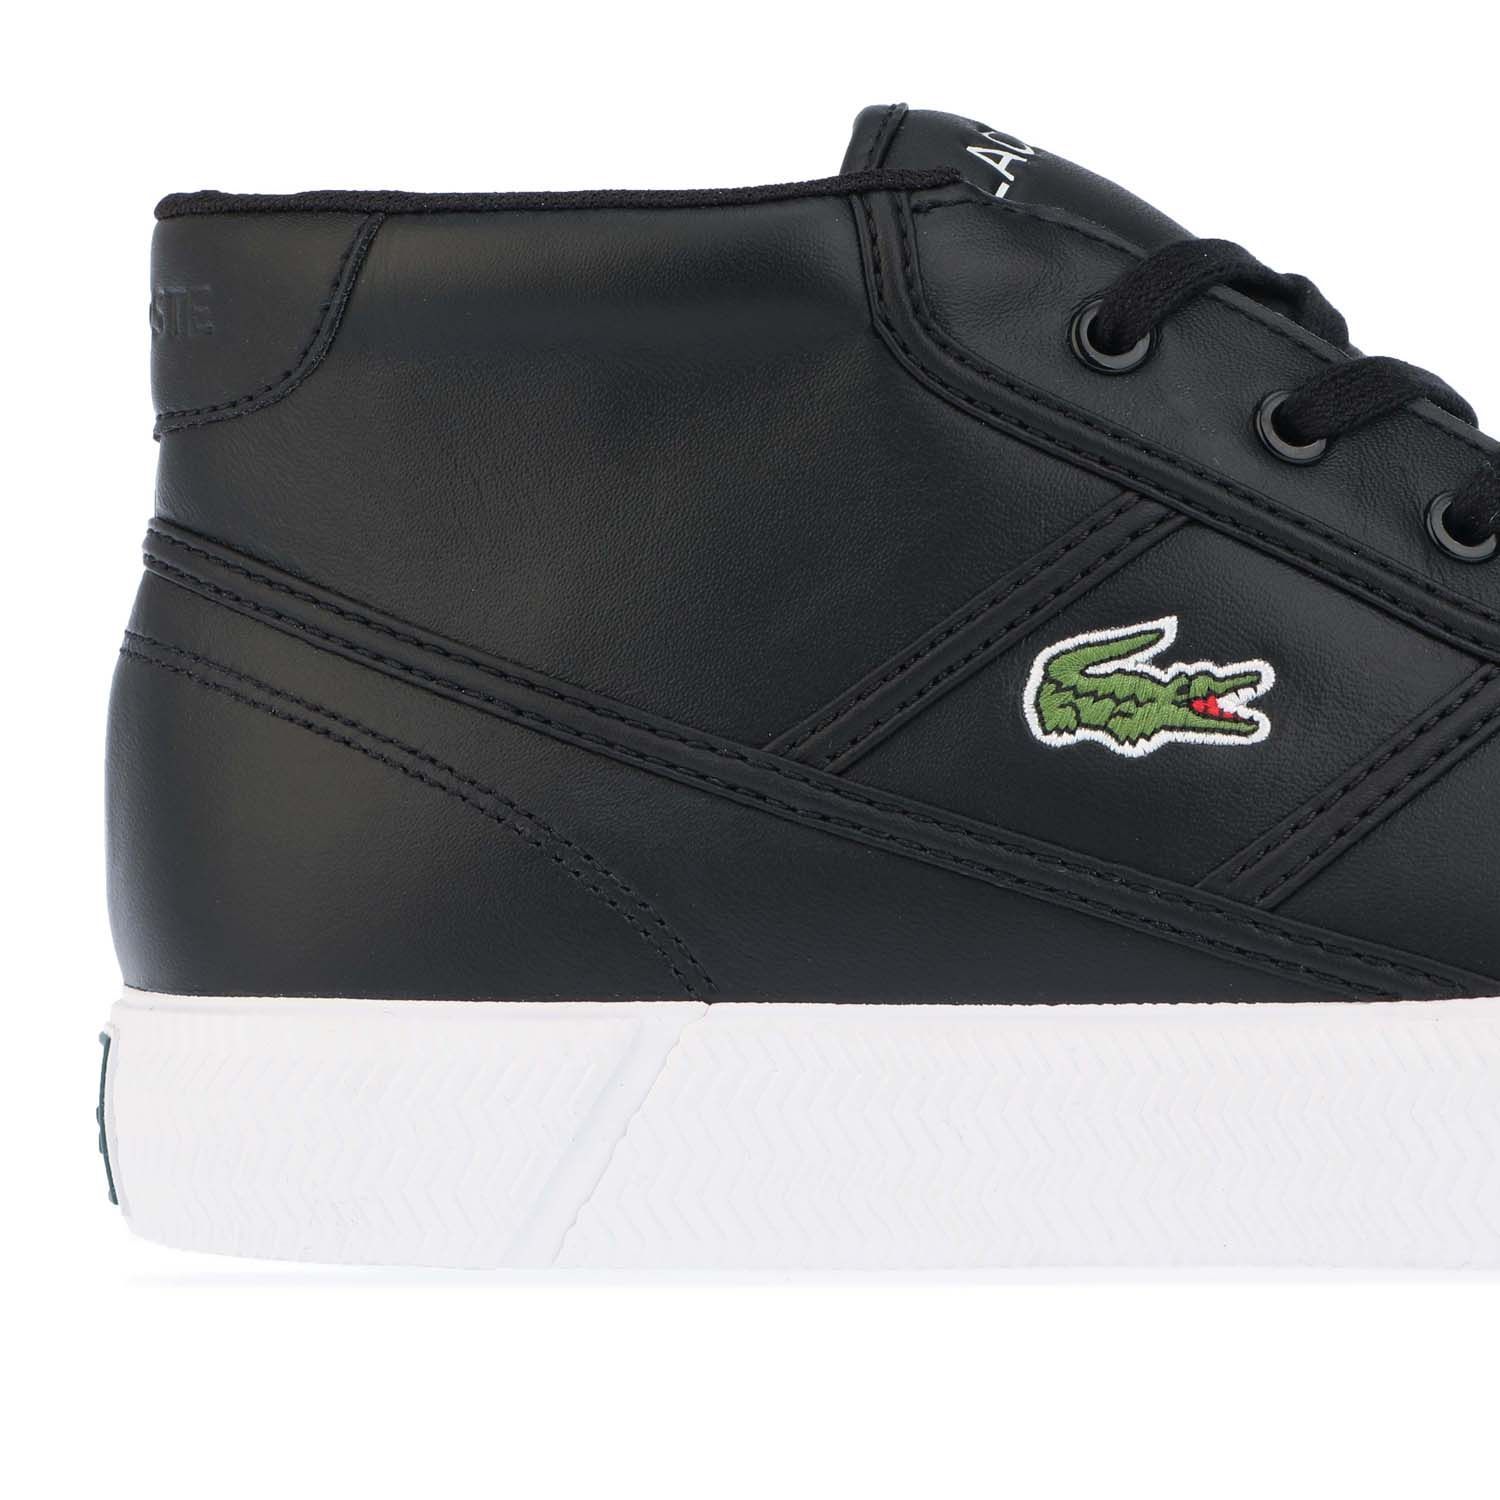 Mens Lacoste Gripshot Chukka Trainers in Black- Canvas and leather uppers.- Lace up fastening with comfortable flat laces.- Comfortable textile lining.- Ortholite sockliner for comfort and odour control.- Embroidered Lacoste lettered branding at tongue.- Contrast heel patch with debossed Lacoste lettered branding.- Embossed crocodile at back heel.- Embroidered crocodile to side.- Rubber sole.- Ref: 742CMA0035312